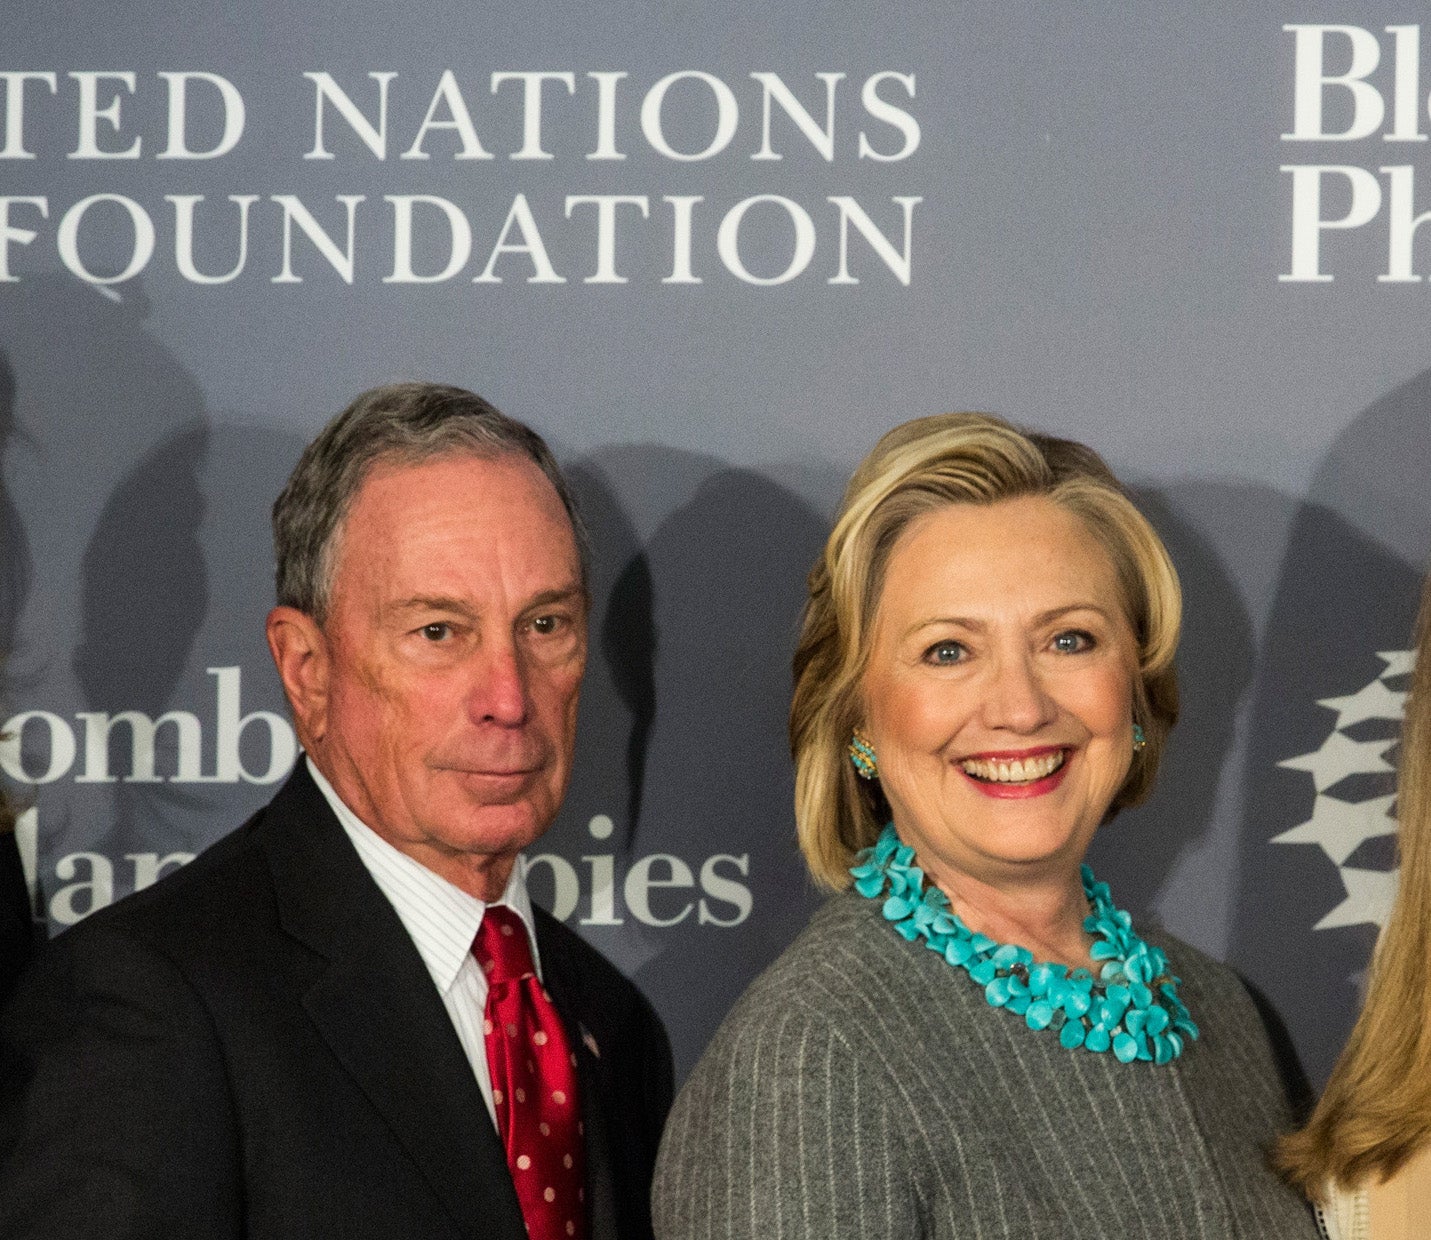 Michael Bloomberg said to be considering Hillary Clinton as possible vice-president